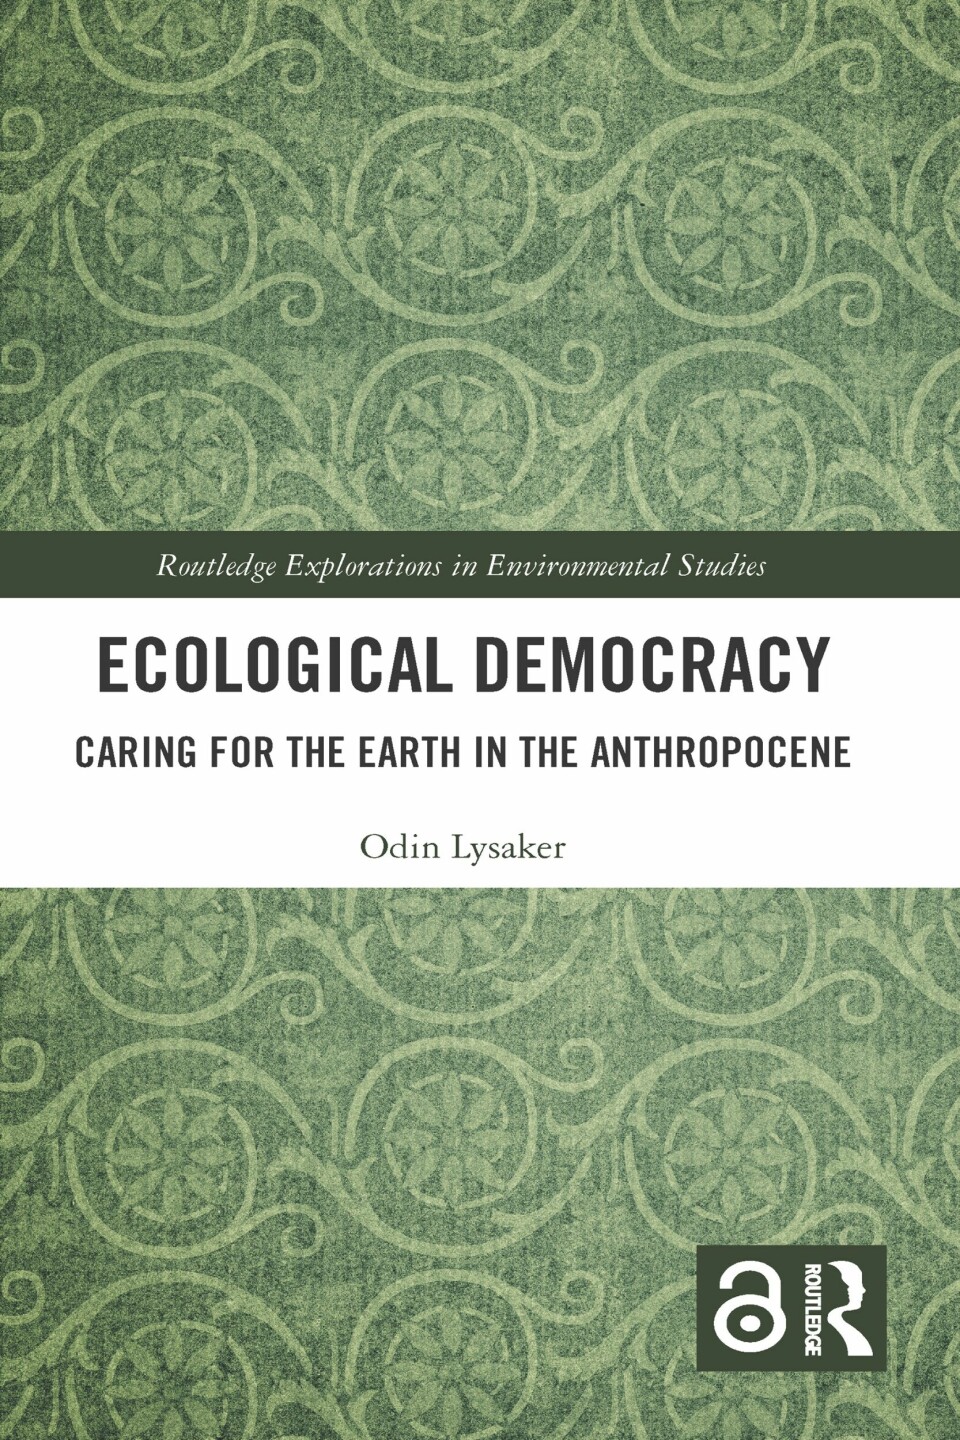 The green book cover of Ecological Democracy.